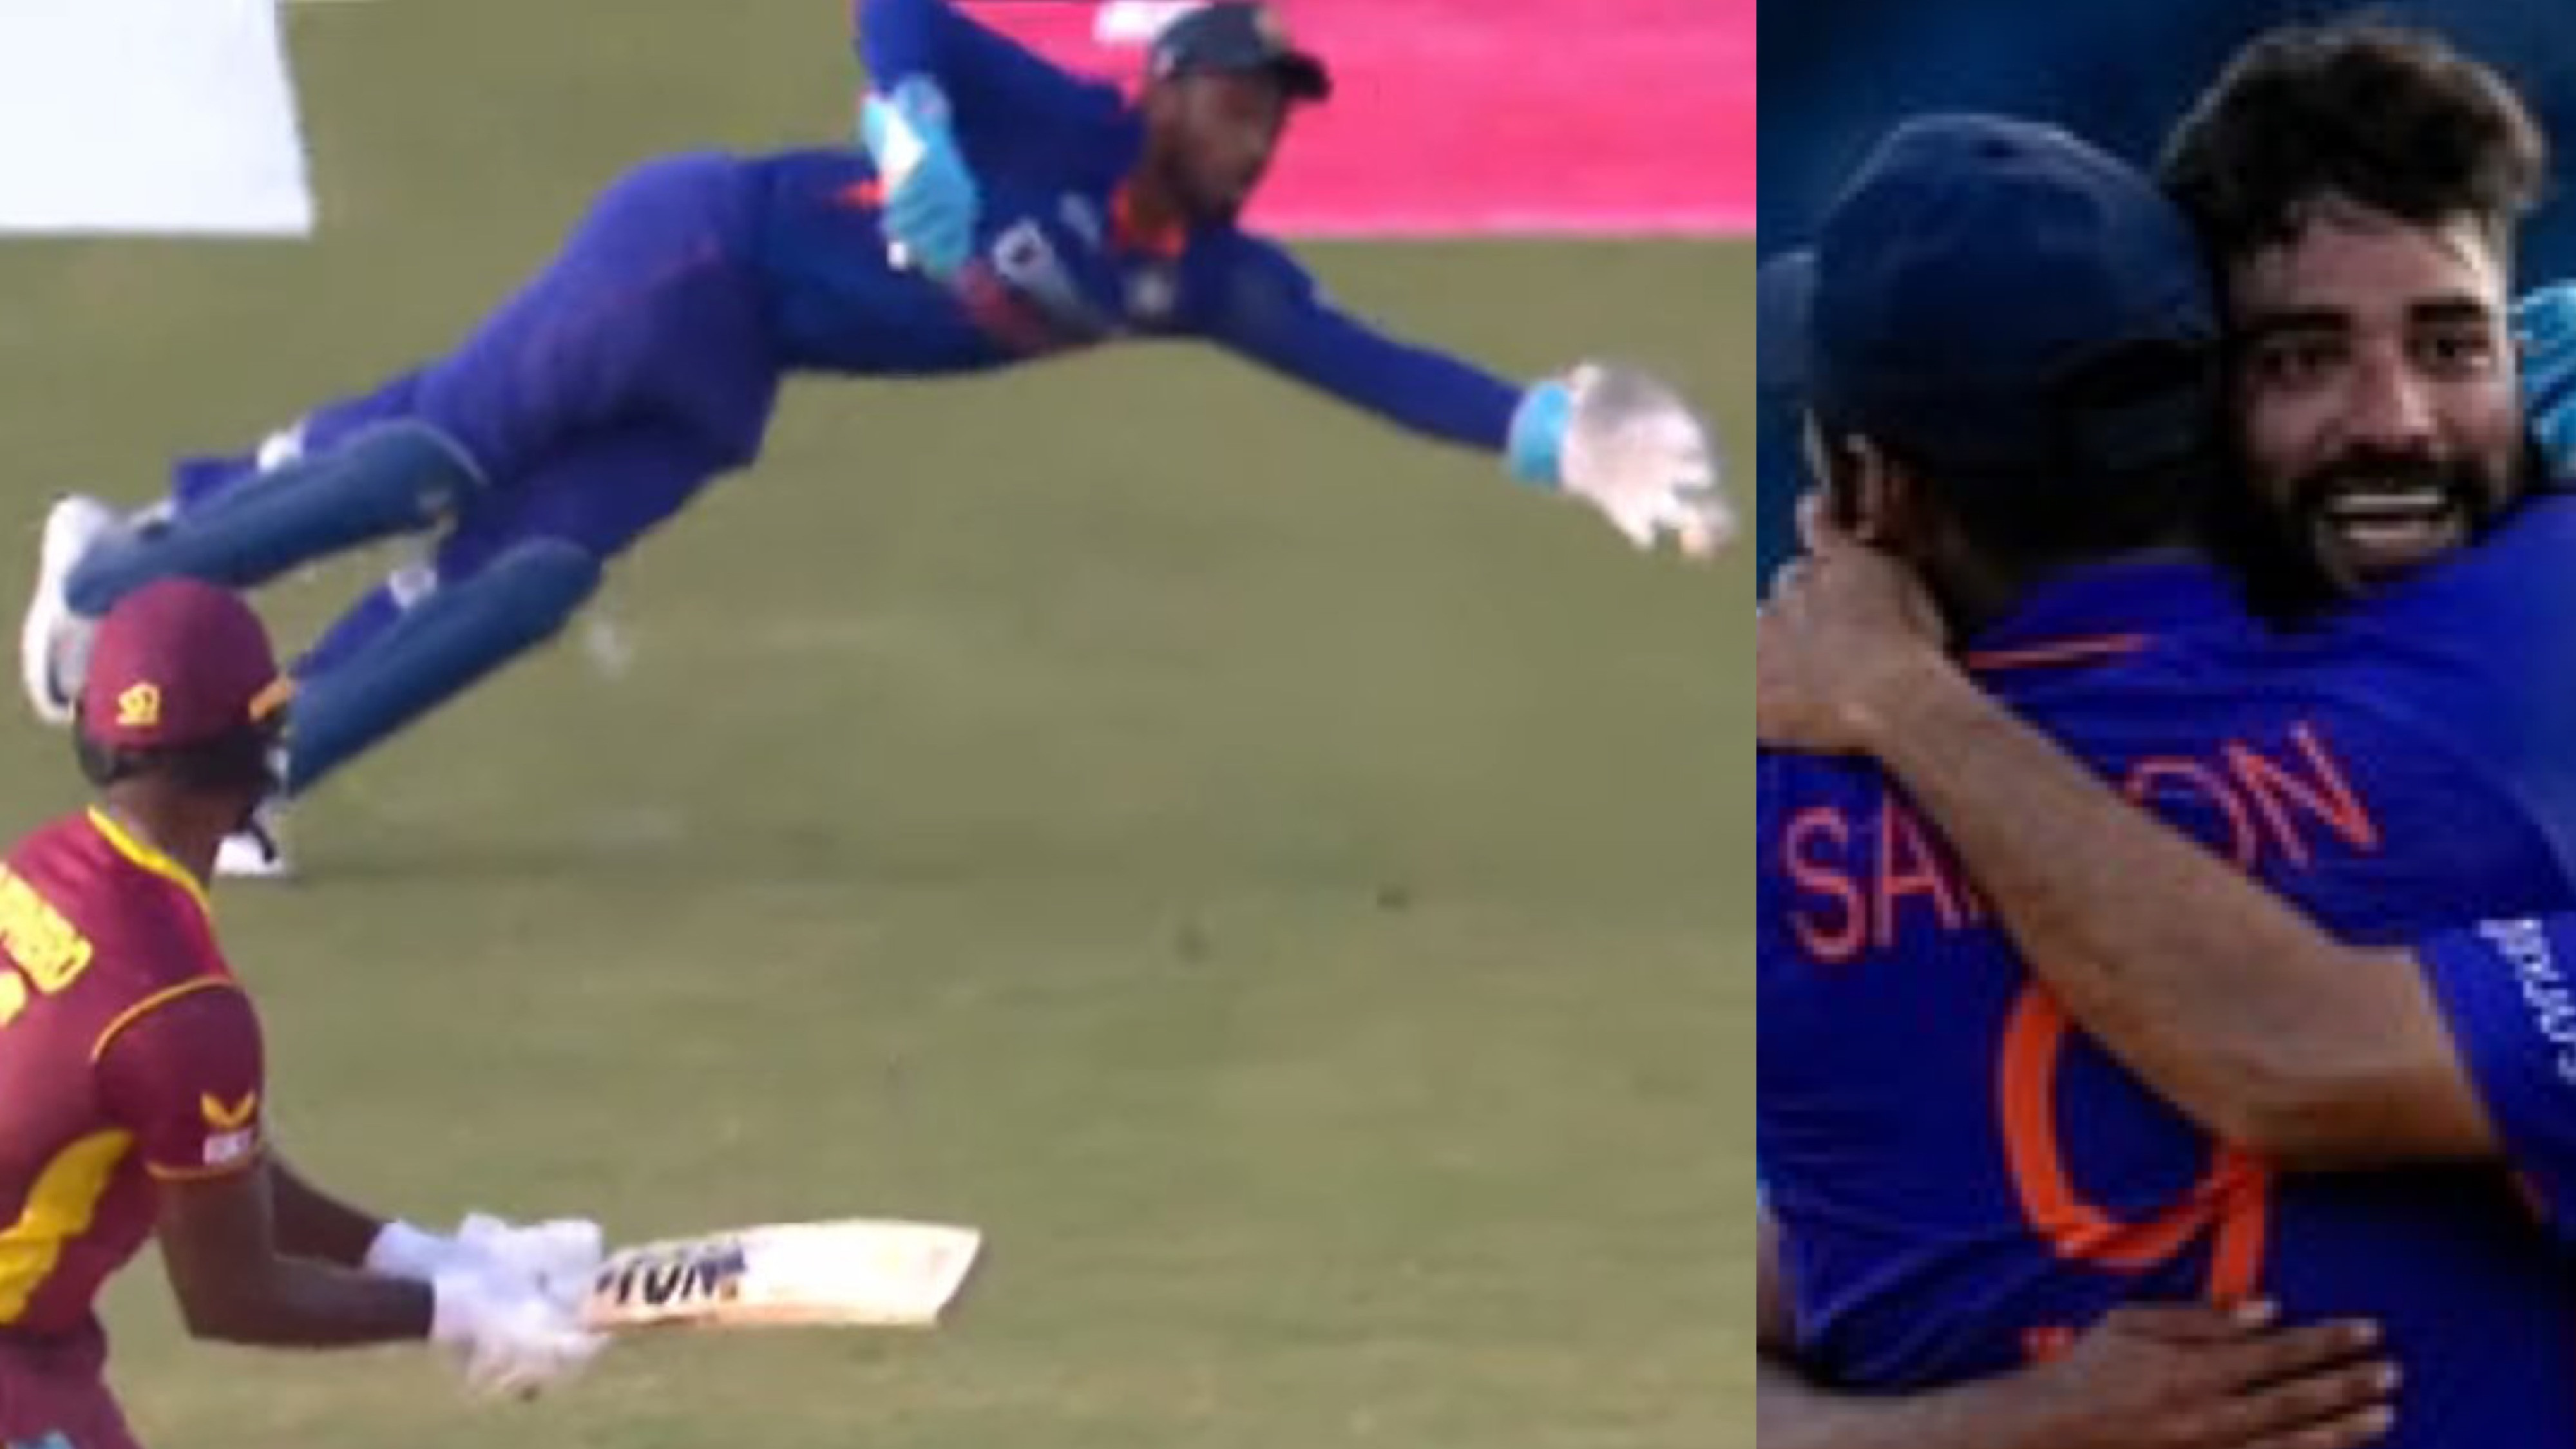 WI v IND 2022: WATCH - Sanju Samson and Mohammed Siraj's brilliance in final over helps India win thriller by 3 runs 